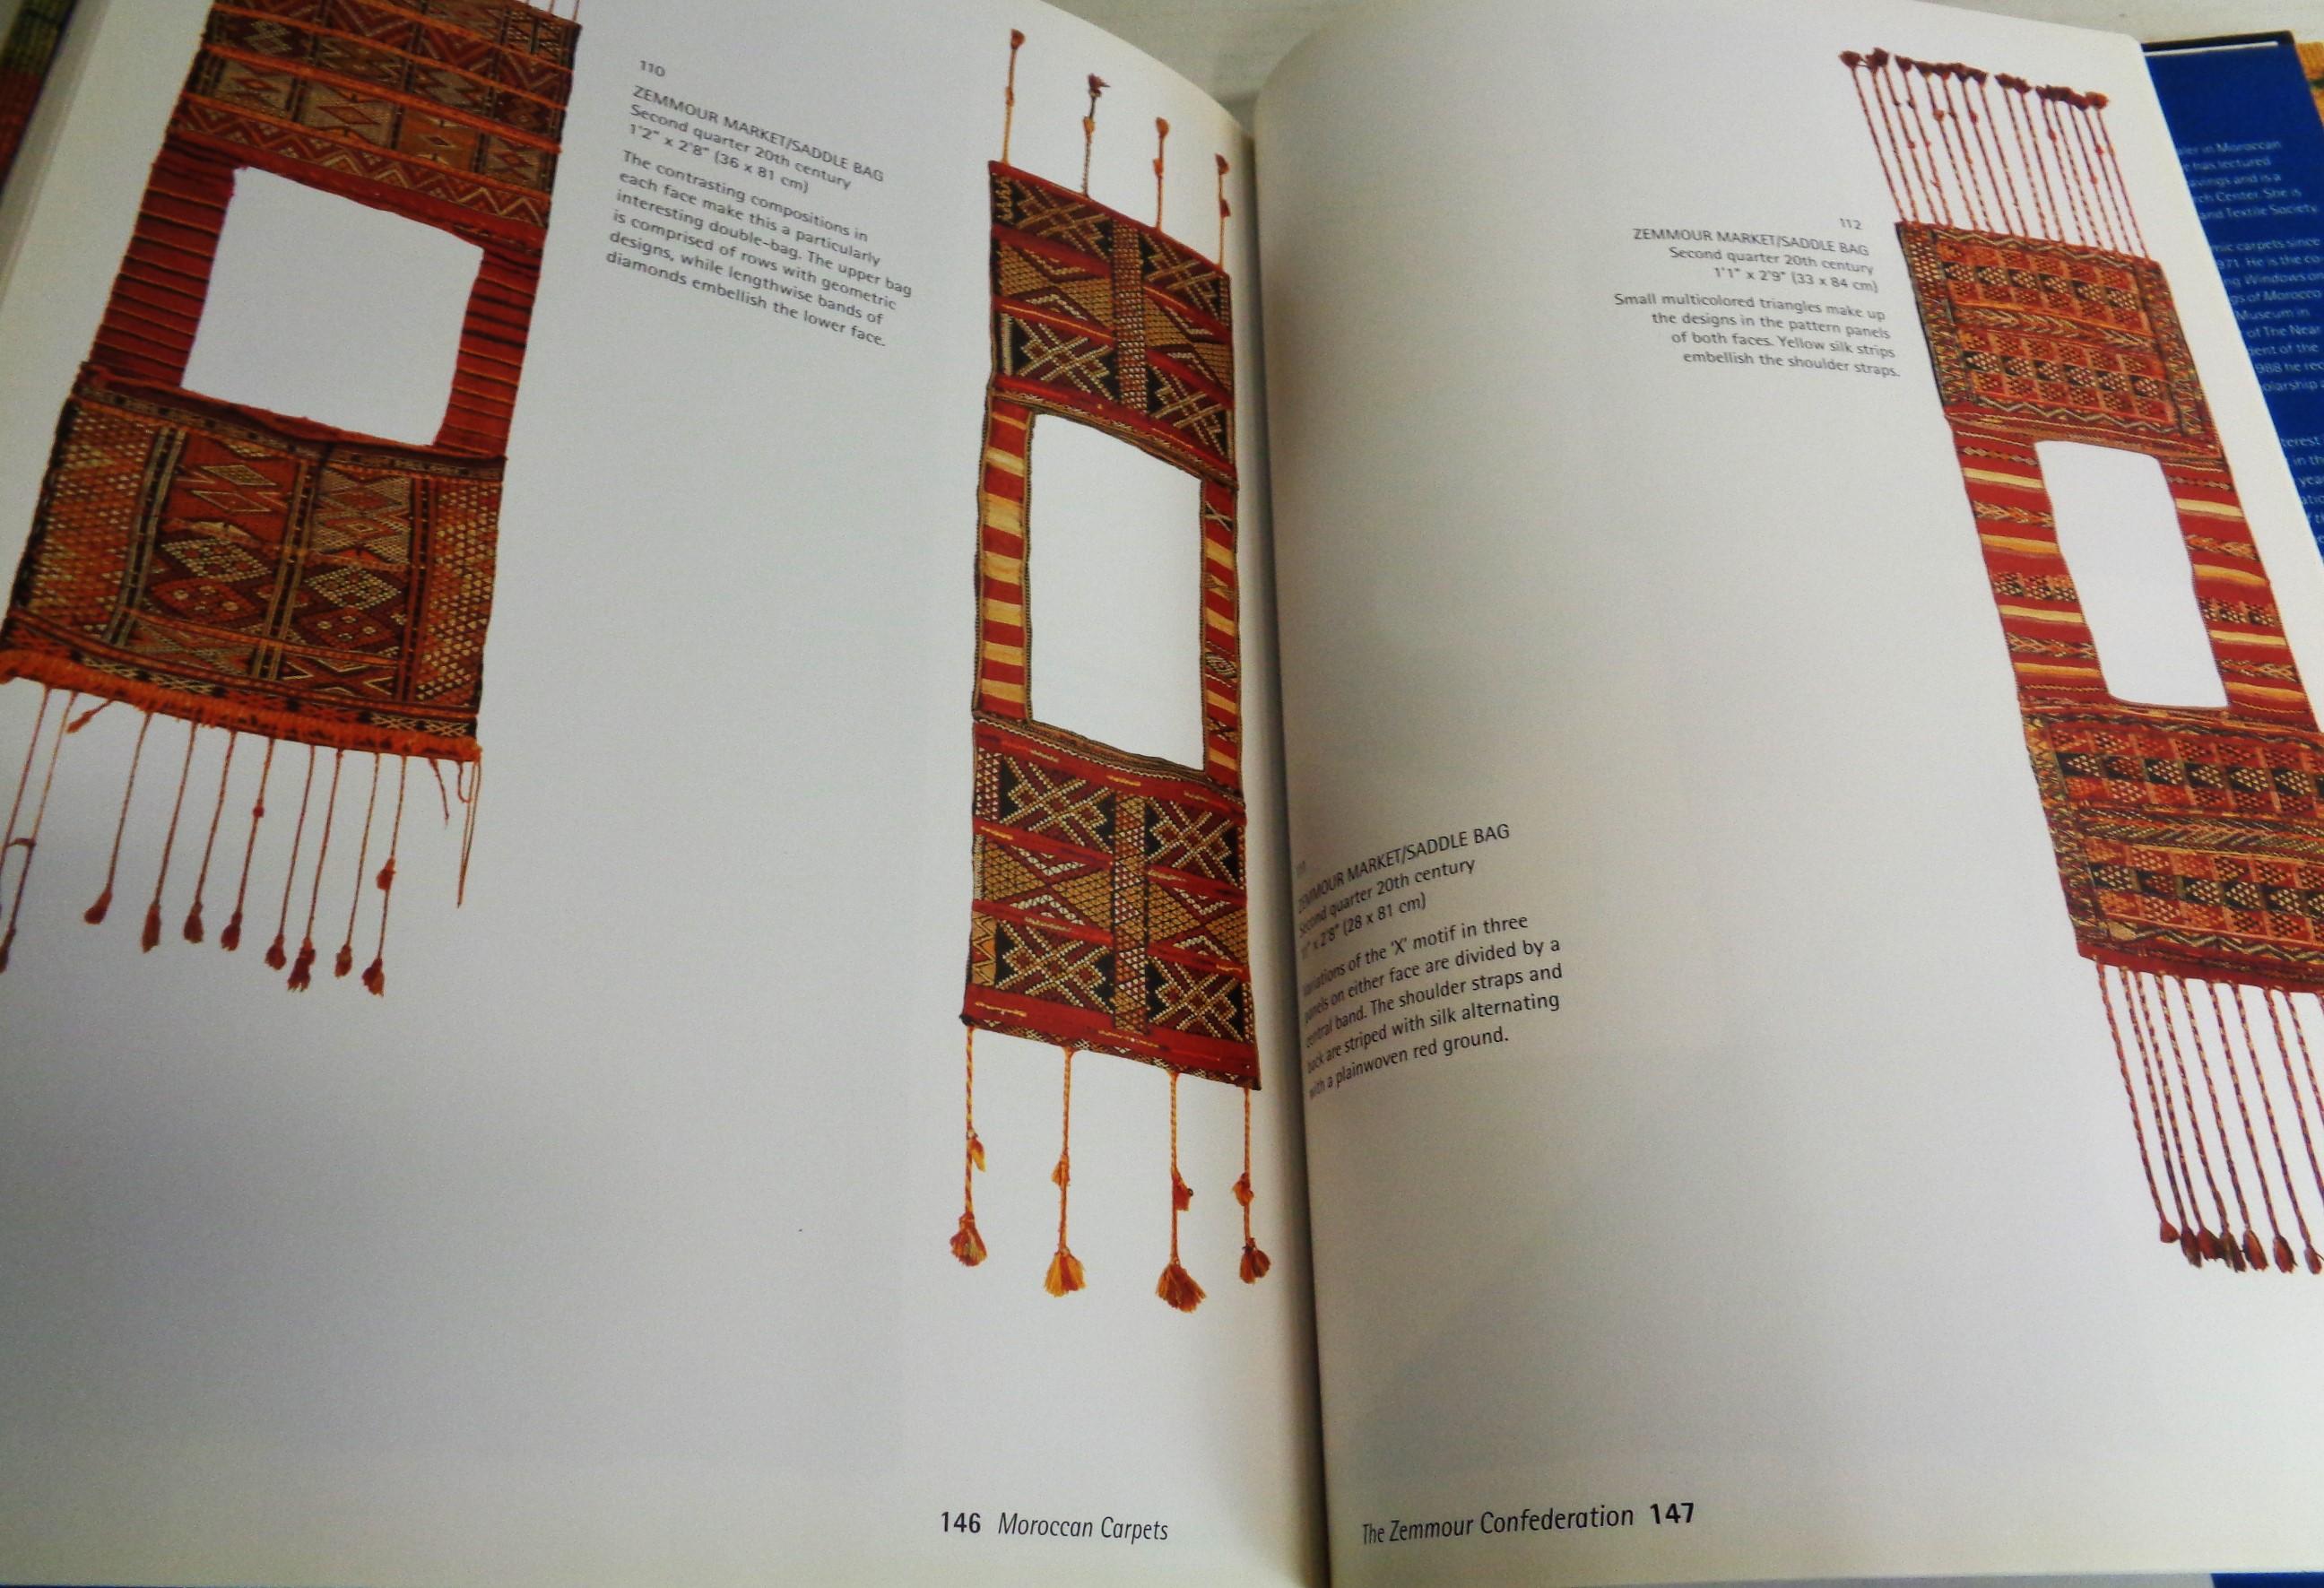  Moroccan Carpets: Pickering, Pickering, Yohe - Laurence King Hali Publications For Sale 10